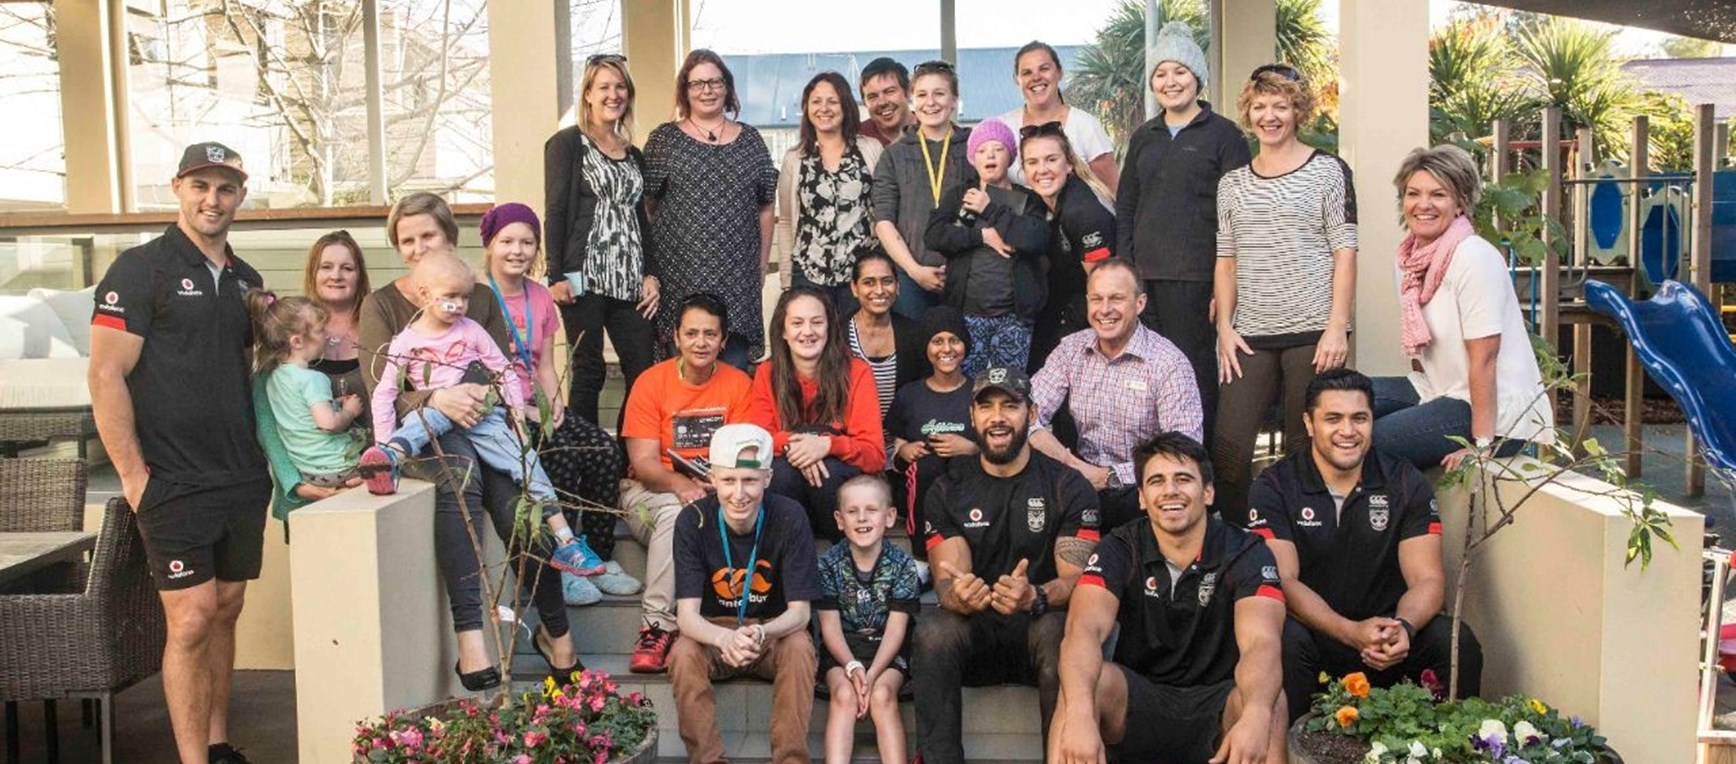 Christchurch community visits in pictures